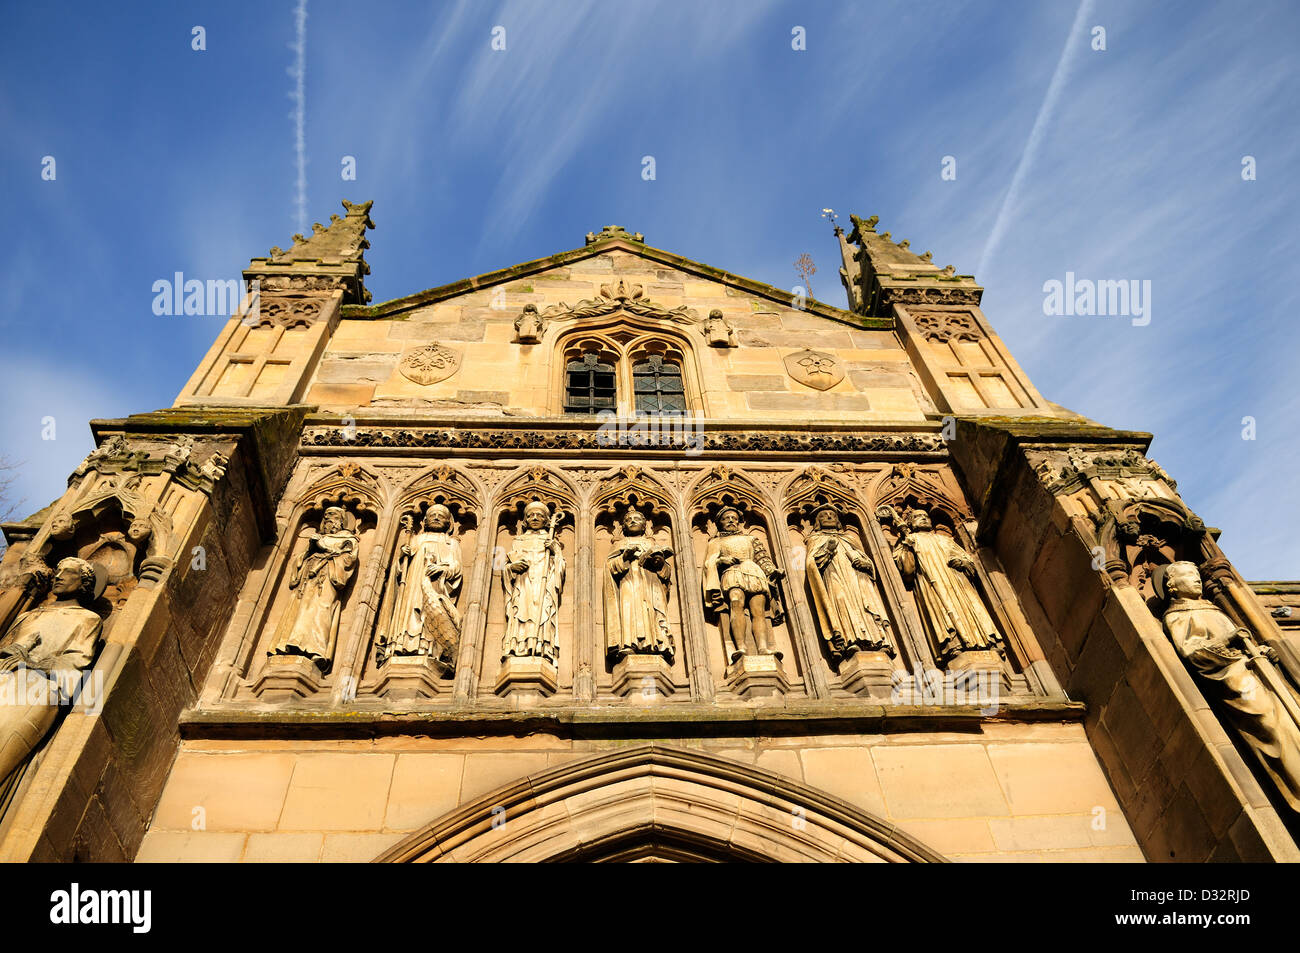 Leicester Cattedrale ,St Martin's. Foto Stock